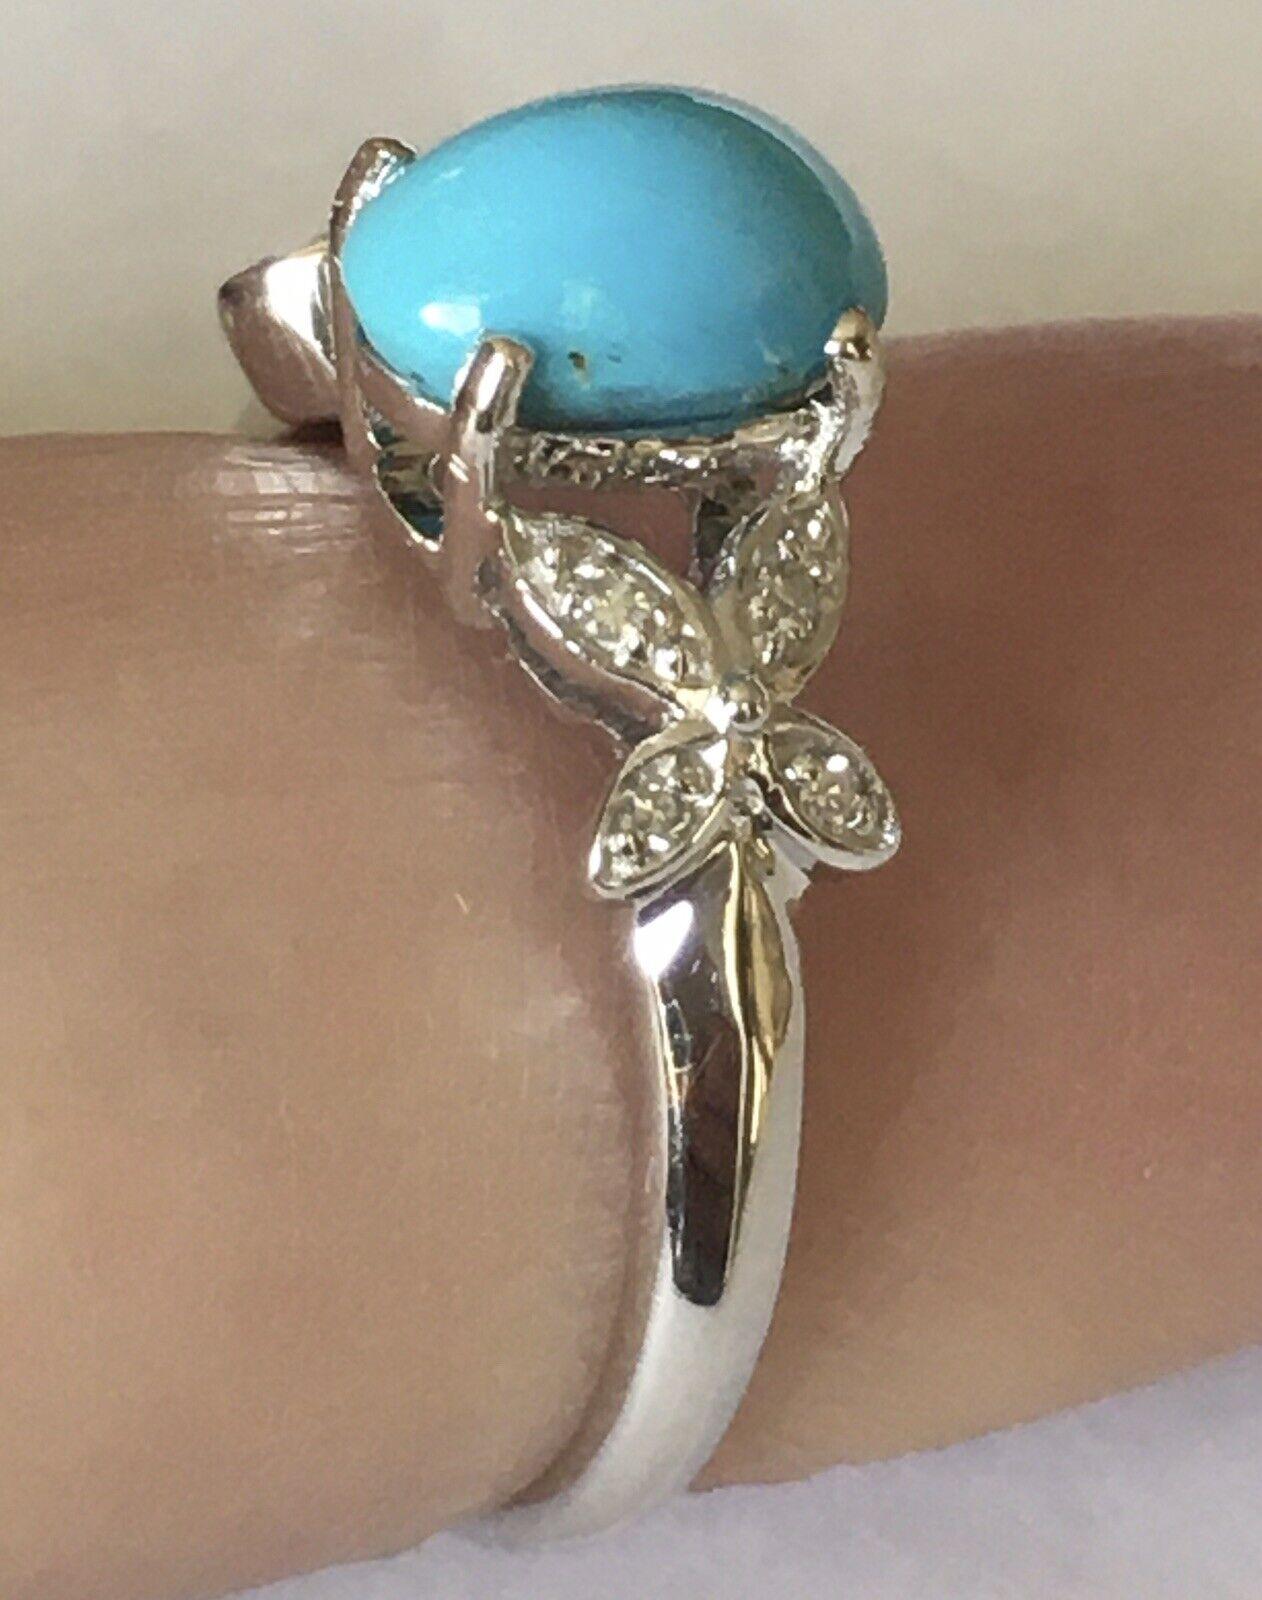 14 Karat White Gold Hallmarked Lady's Diamond Persian Turquoise Ring 1970s Size In Good Condition For Sale In Santa Monica, CA